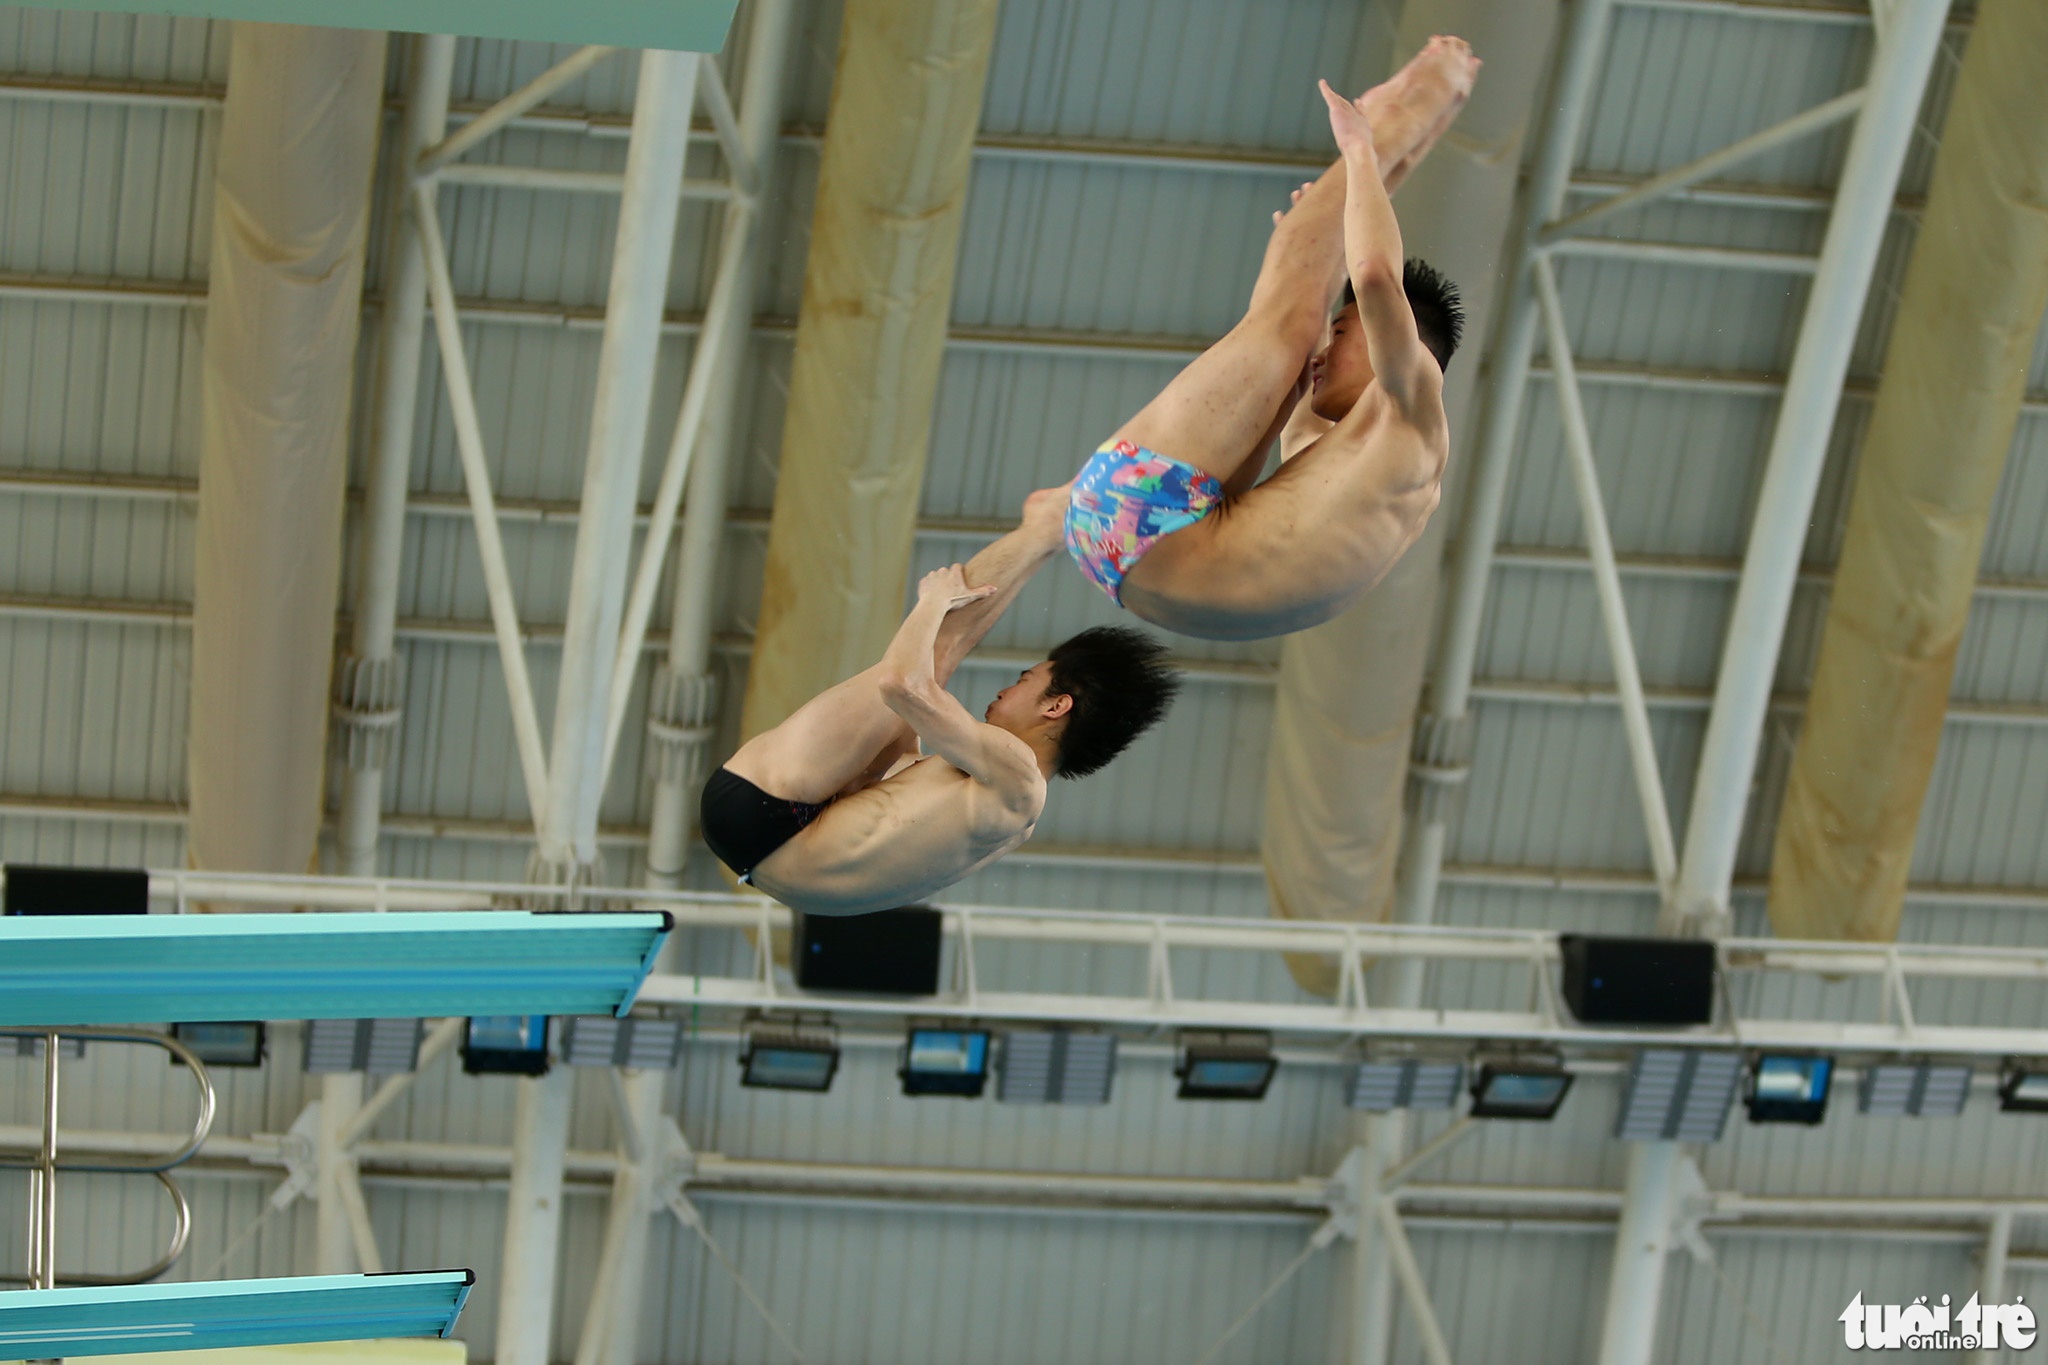 Vietnamese diving athletes train for the 31st Southeast Asian (SEA) Games at My Dinh Water Sports Center in Hanoi, April 25, 2022. Photo: Tuoi Tre